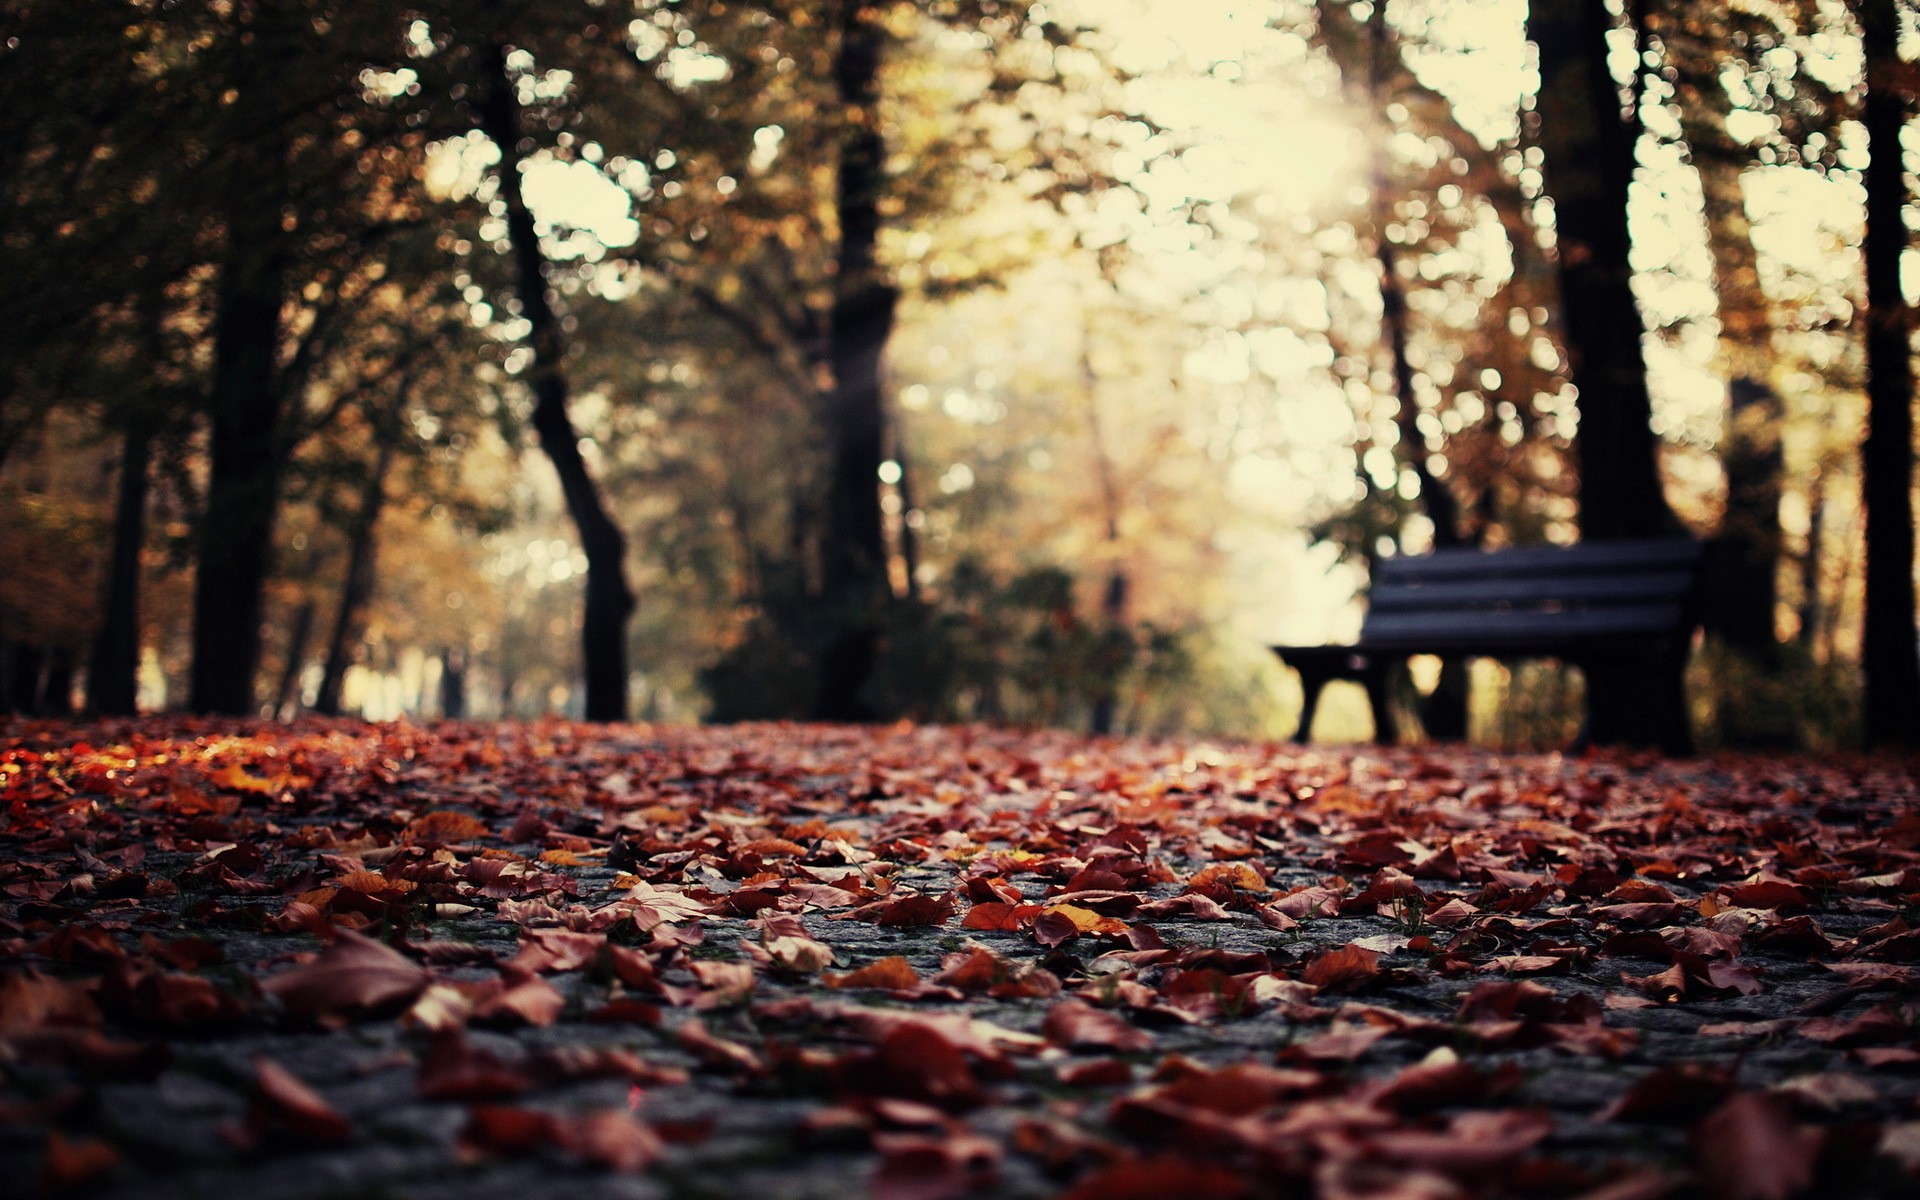 Wallpapers : sunlight, forest, fall, leaves, depth of field, nature, evening, morning, bench, bokeh, tree, autumn, leaf, season, woodland, woody plant 1920x1200